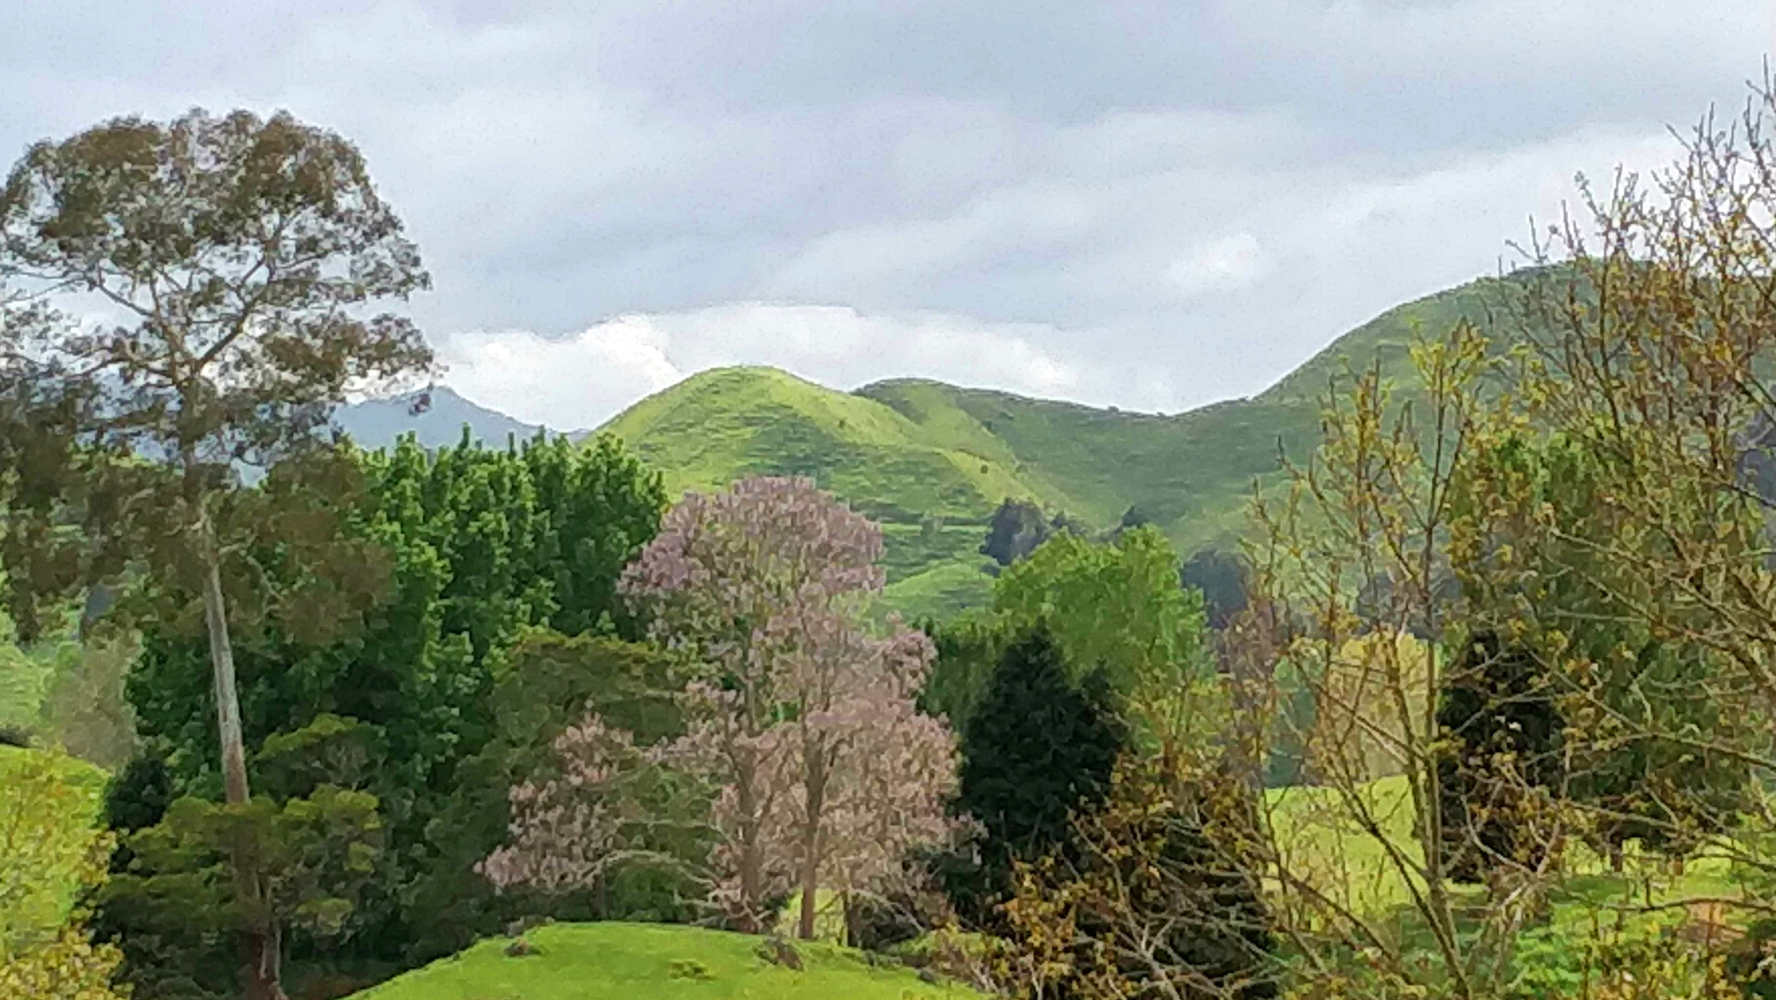 Hill farming with lilac and deciduous trees in spring bloom, New Zealand